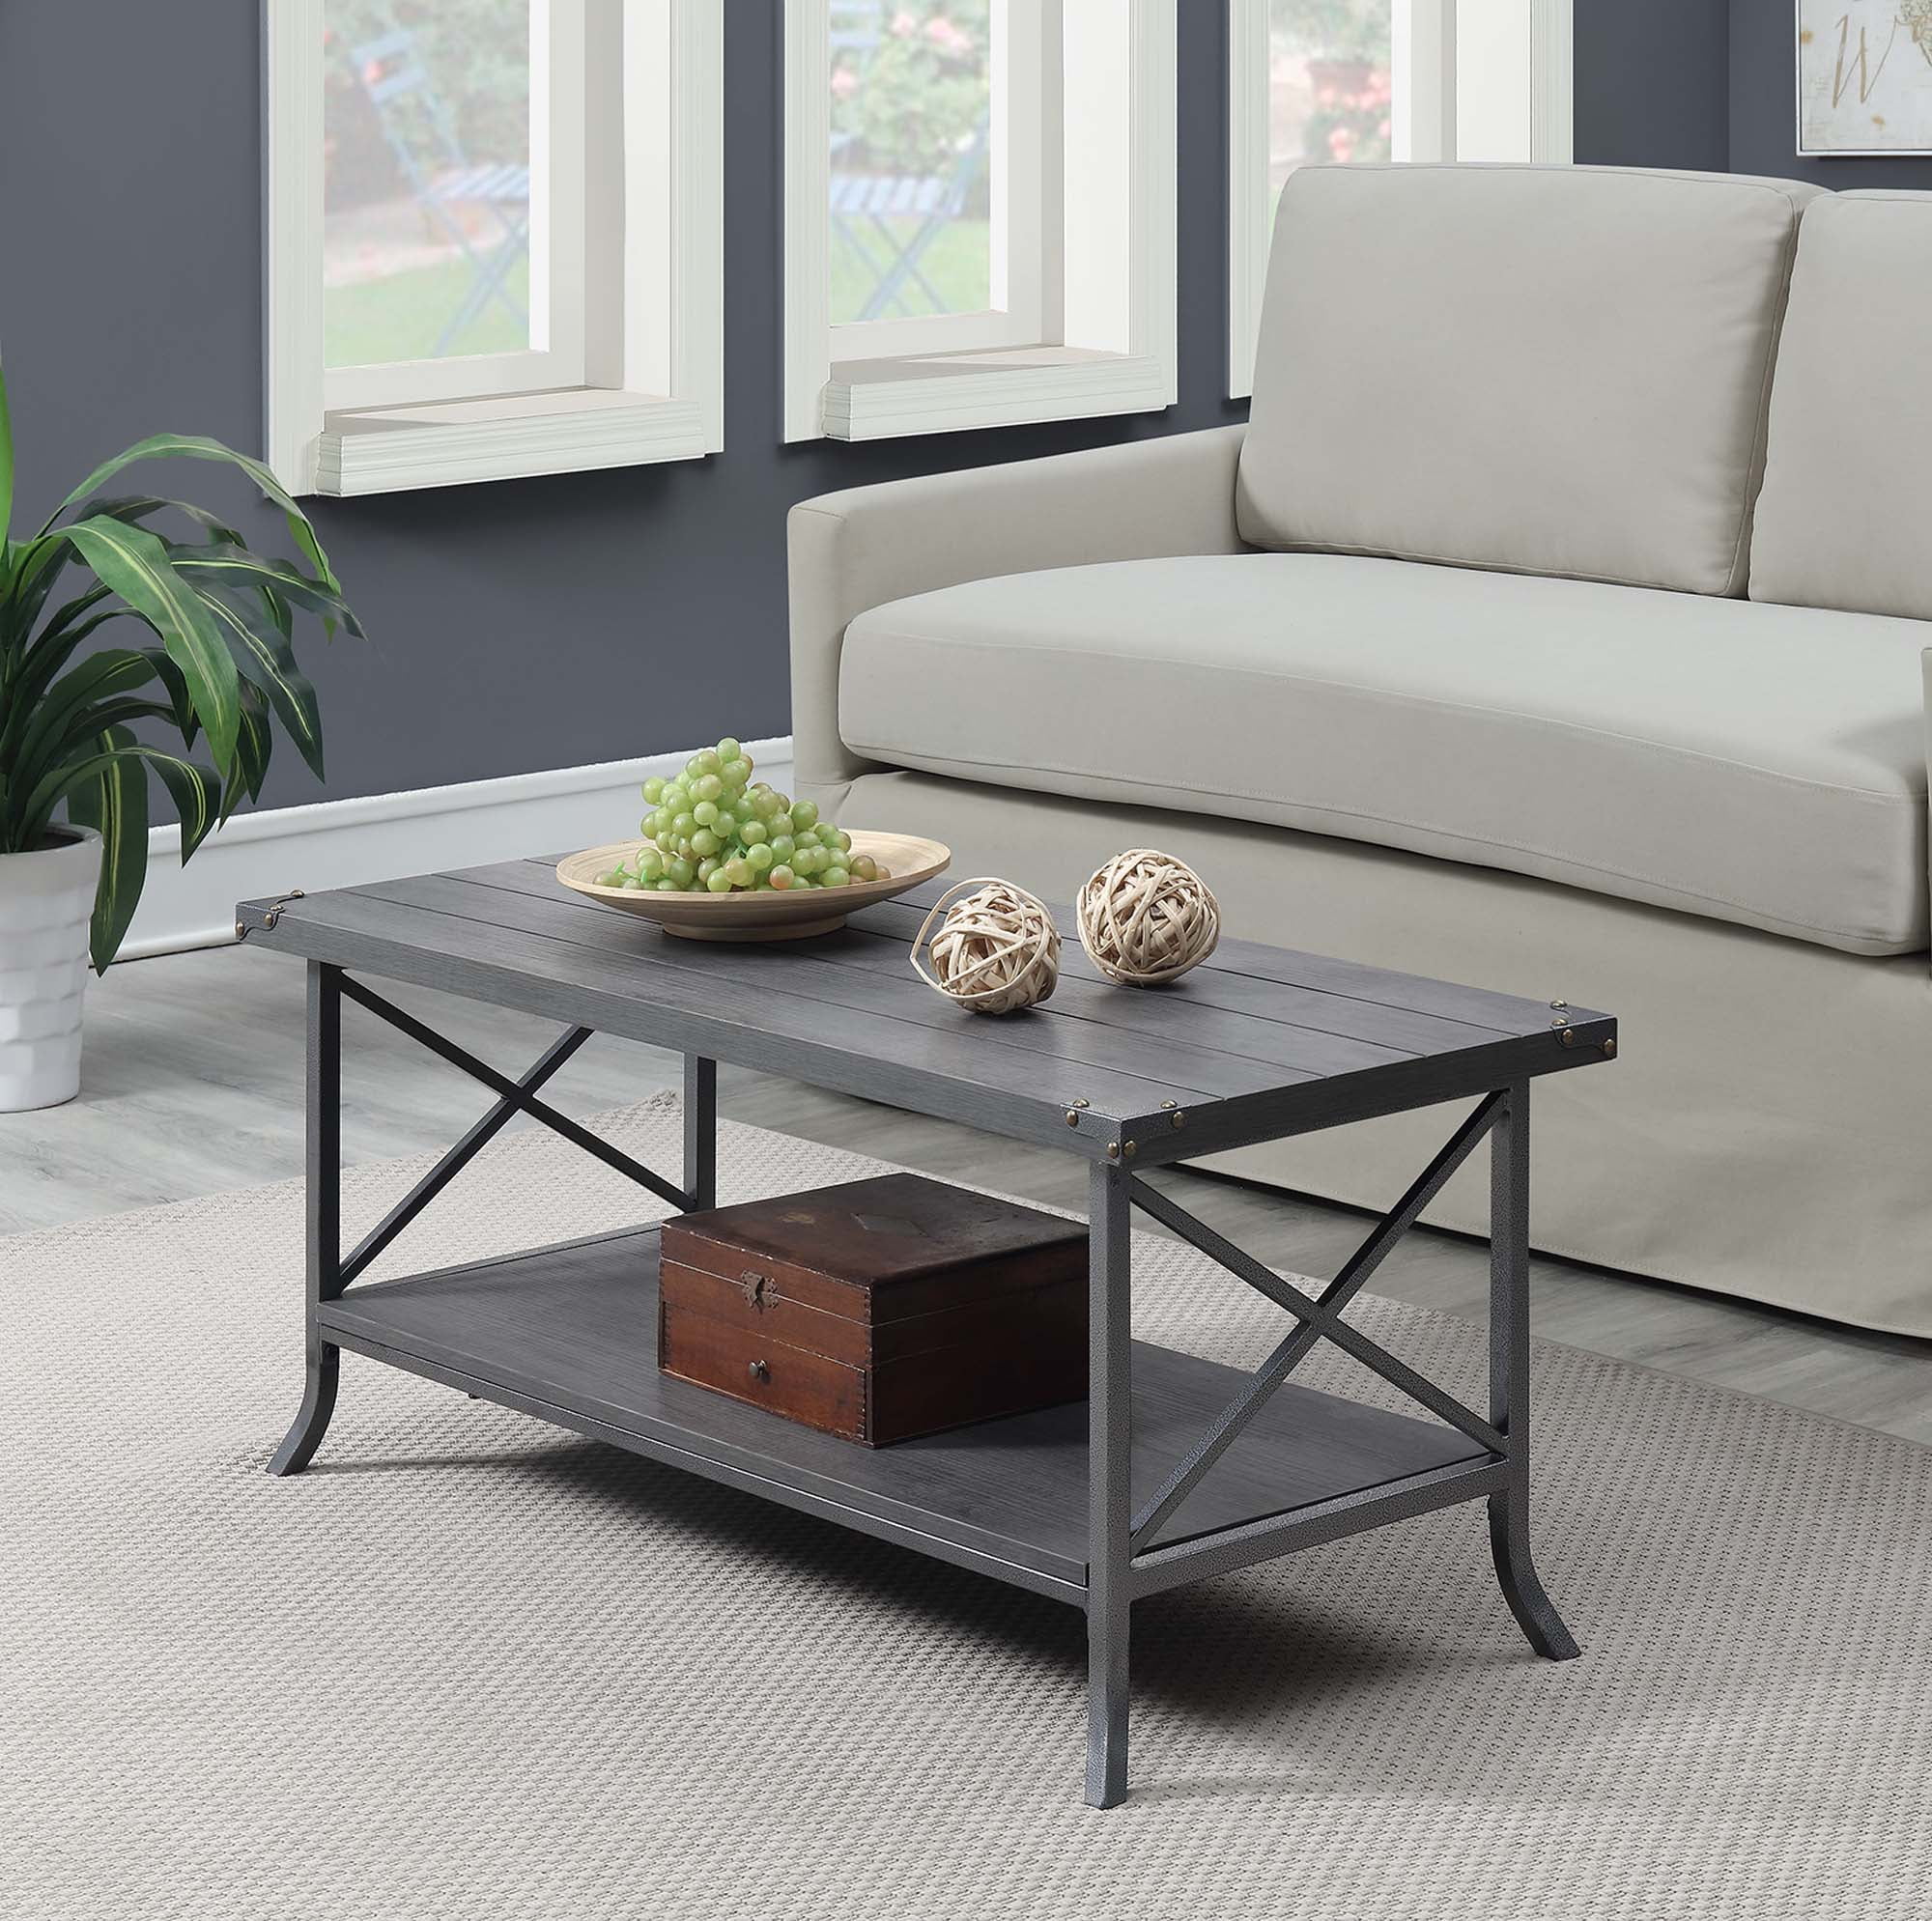 Convenience Concepts Brookline Coffee Table Charcoal Slate Gray Frame